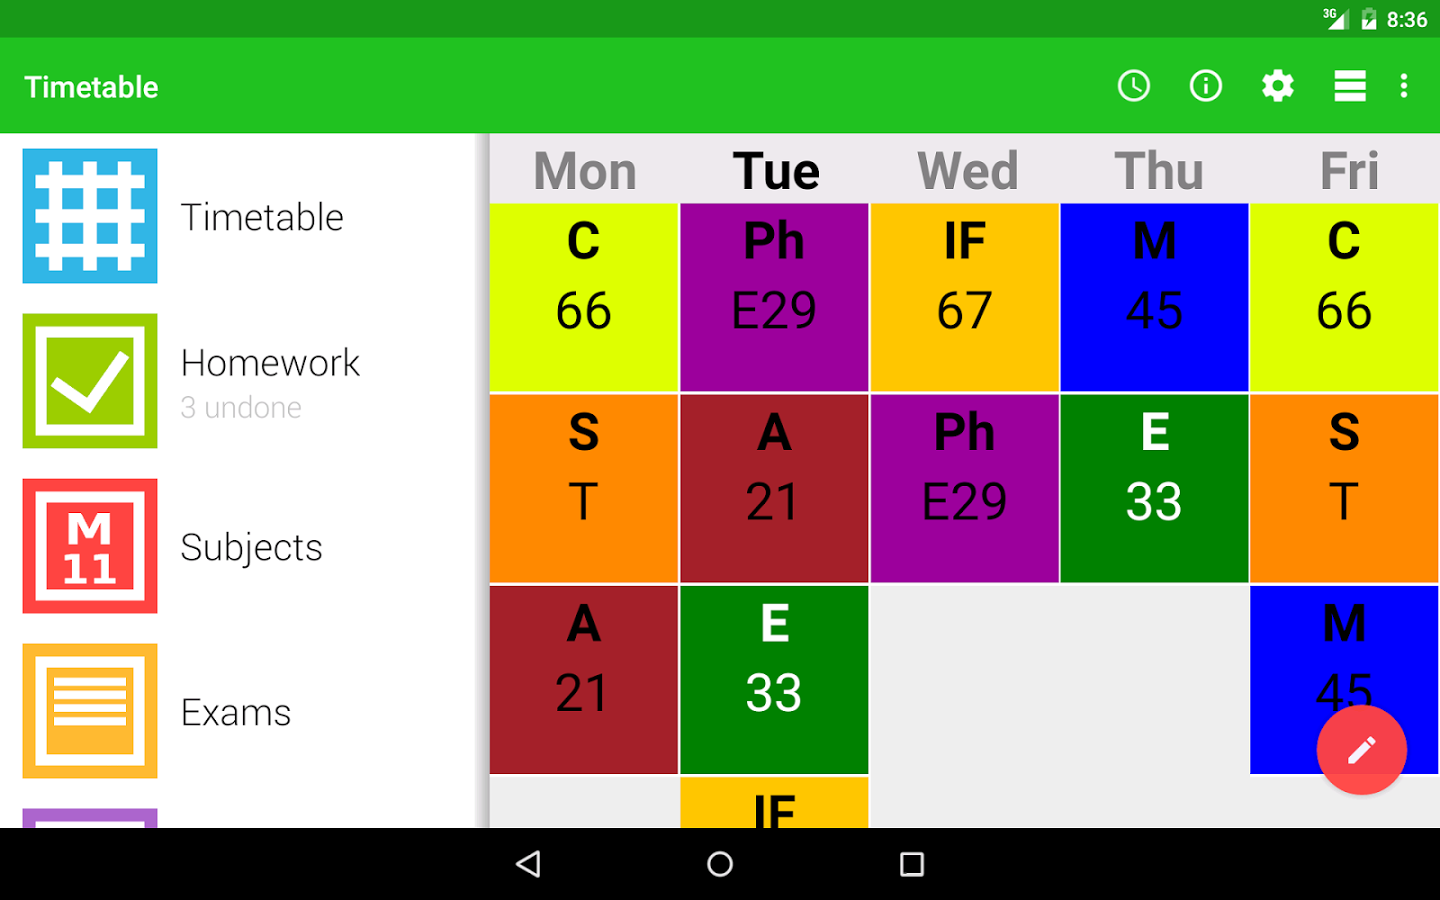 Timetable Schedule Maker Apps for Android